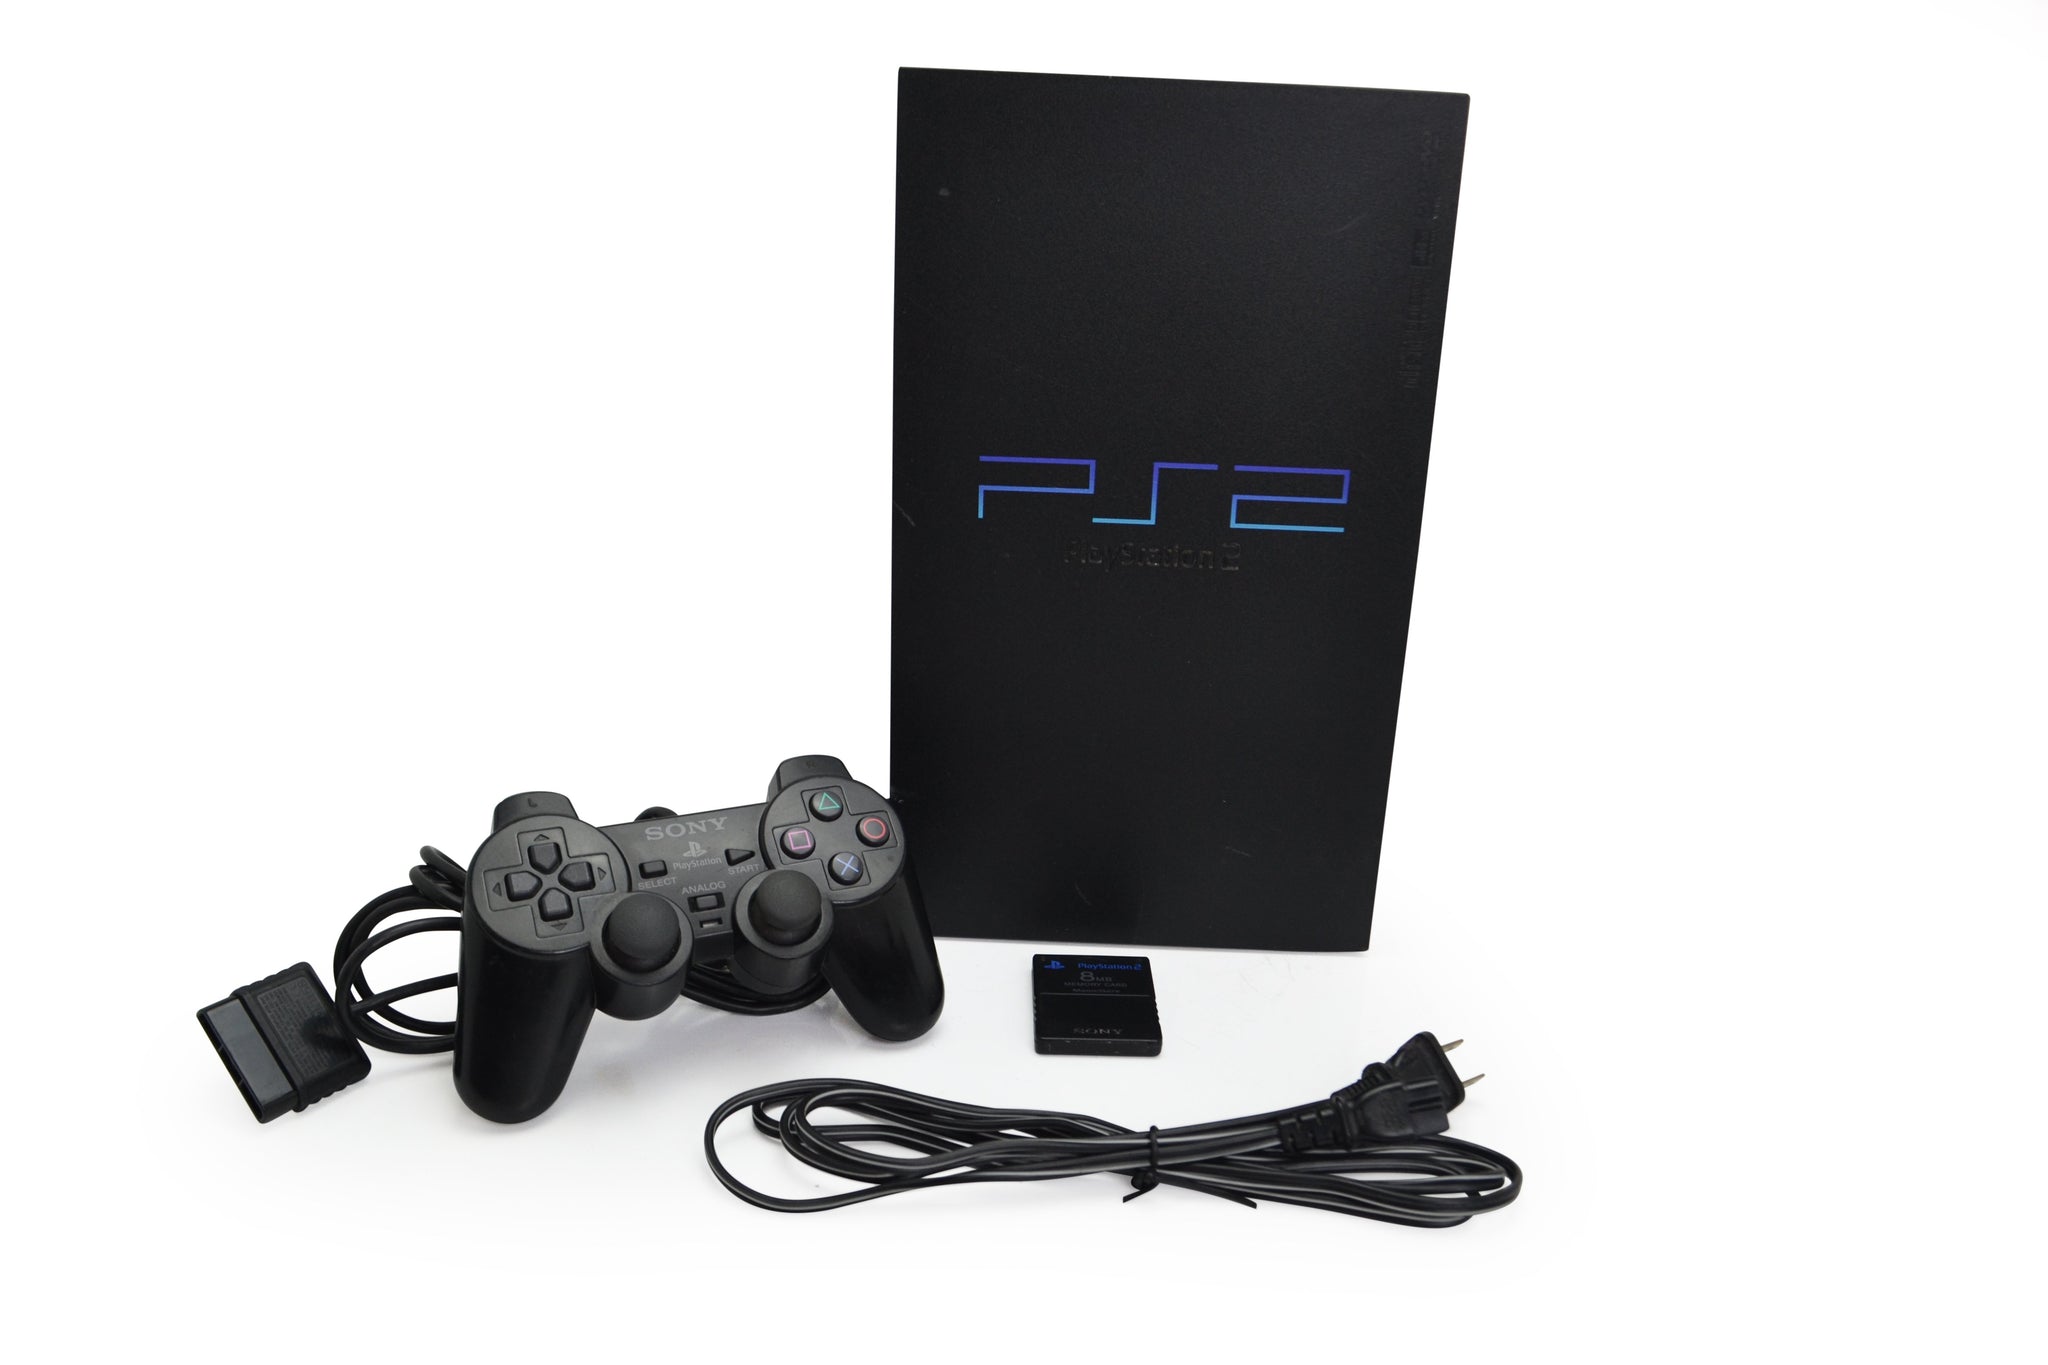 OEM Sony PS2 SLIM Video Game System Gaming Bundle Console Set